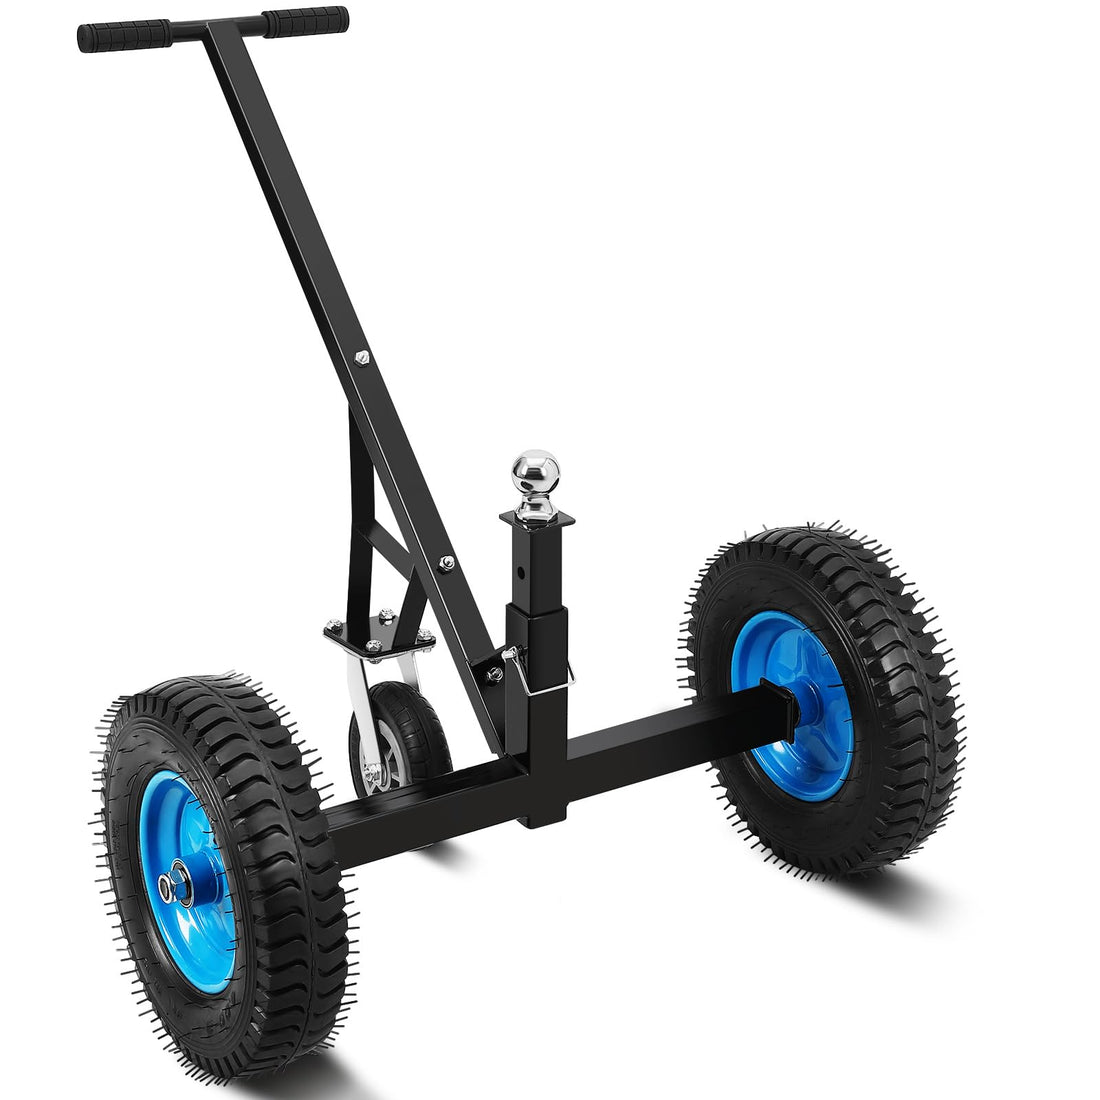 Adjustable Trailer Dolly with 1000lbs Load Capacity, Heavy Duty Carbon Steel Trailer Mover for Moving Car RV Boat Trailer, 19-26 Inch Adjustable Height, 2 Inch Ball & 16 Inch Pneumatic Tires